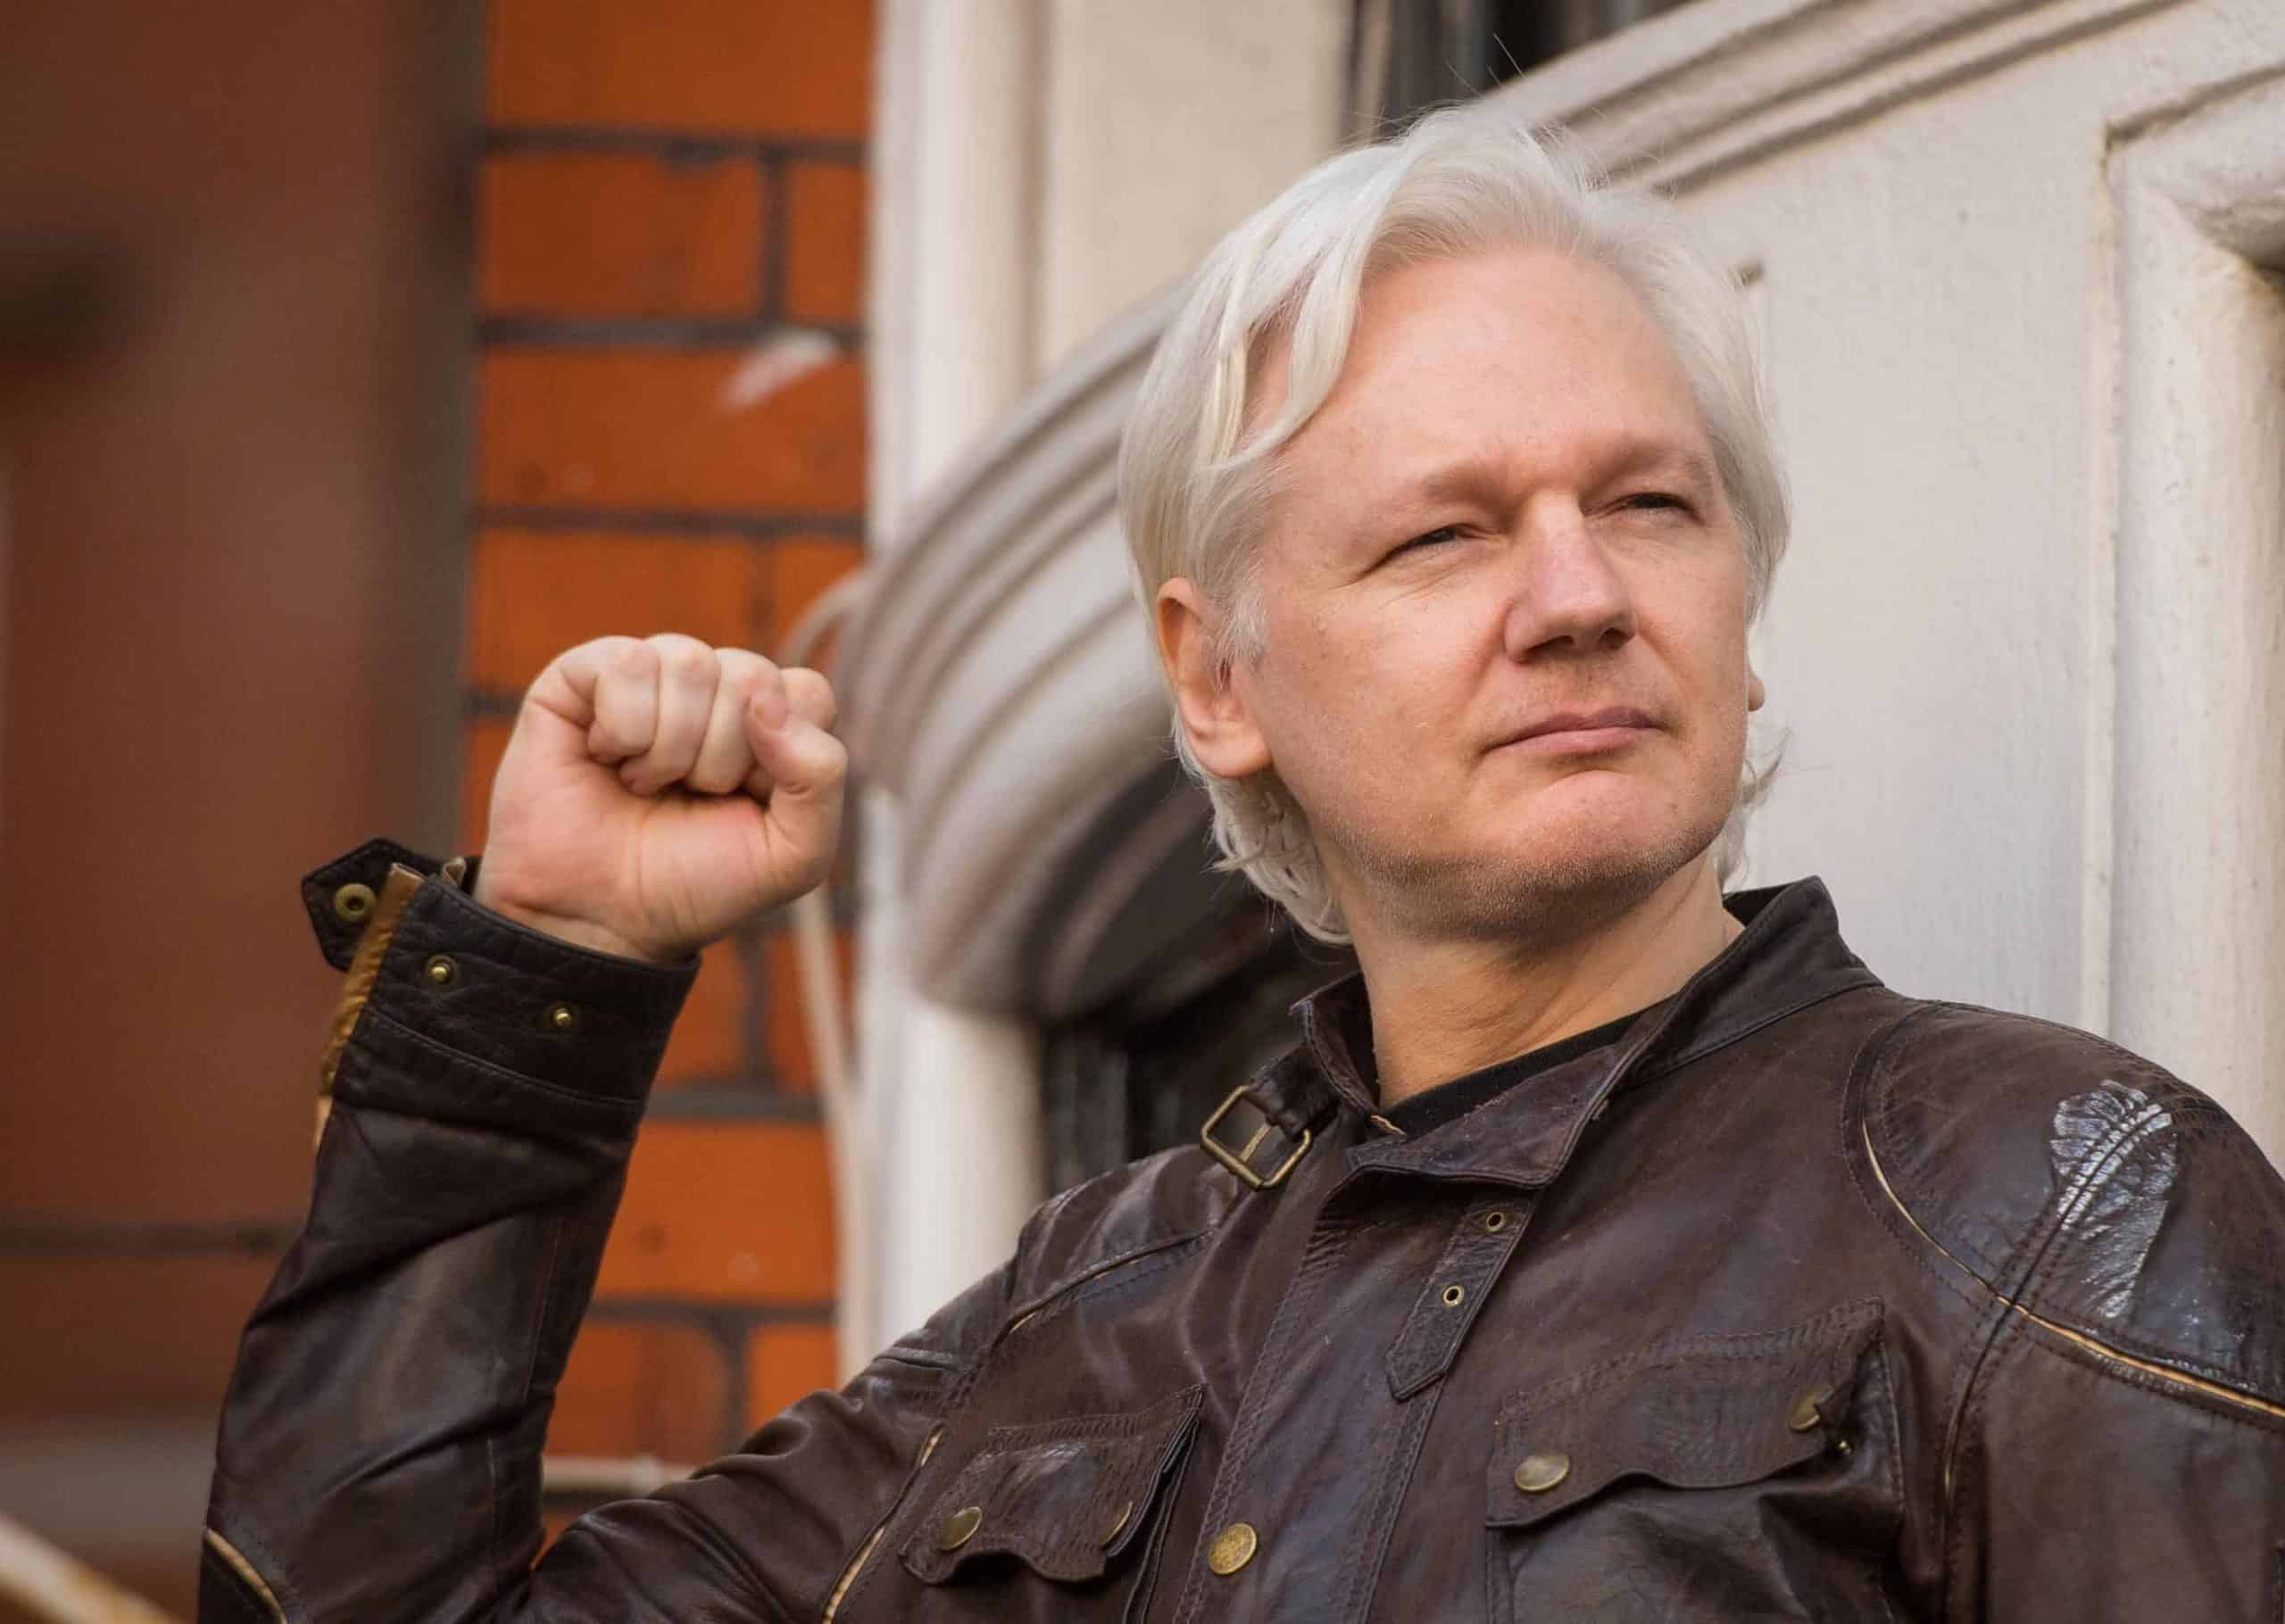 Sweden’s move to drop Assange inquiry welcomed by WikiLeaks